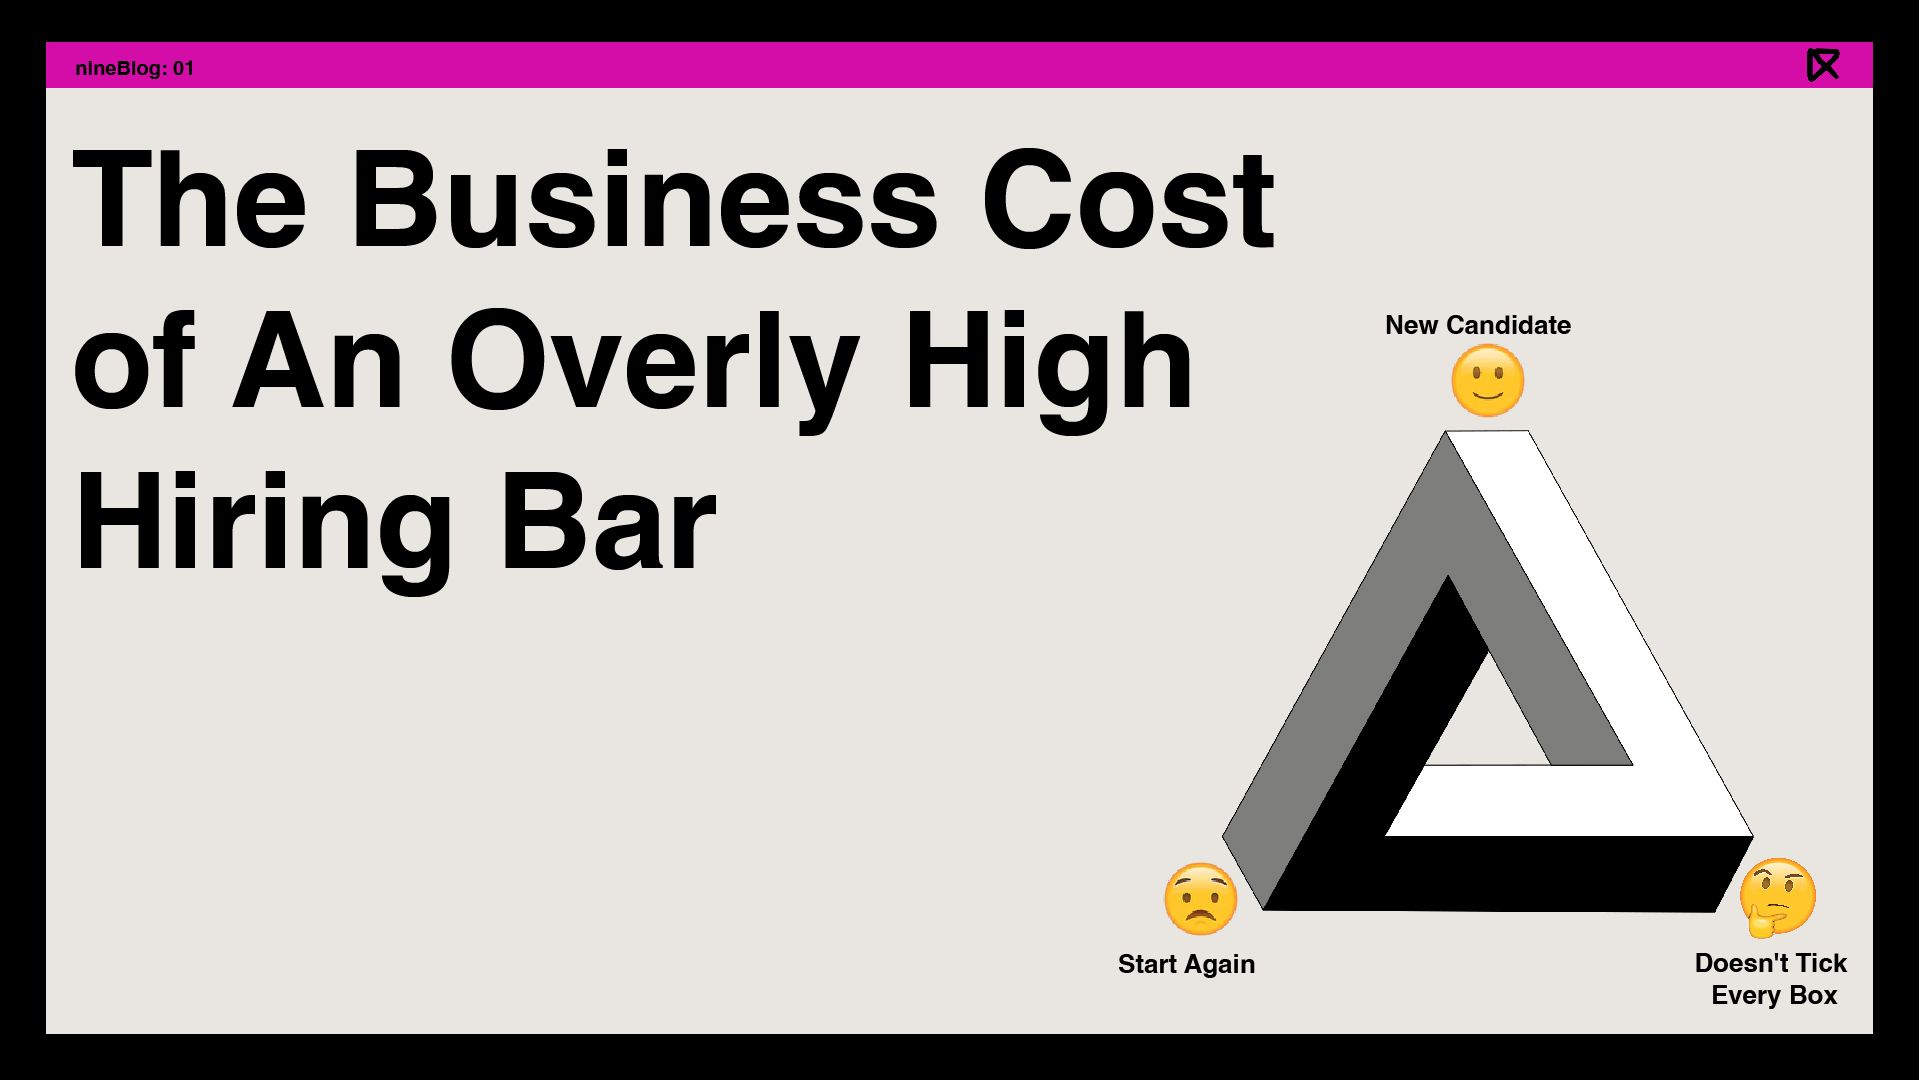 The Business Cost of An Overly High Hiring Bar